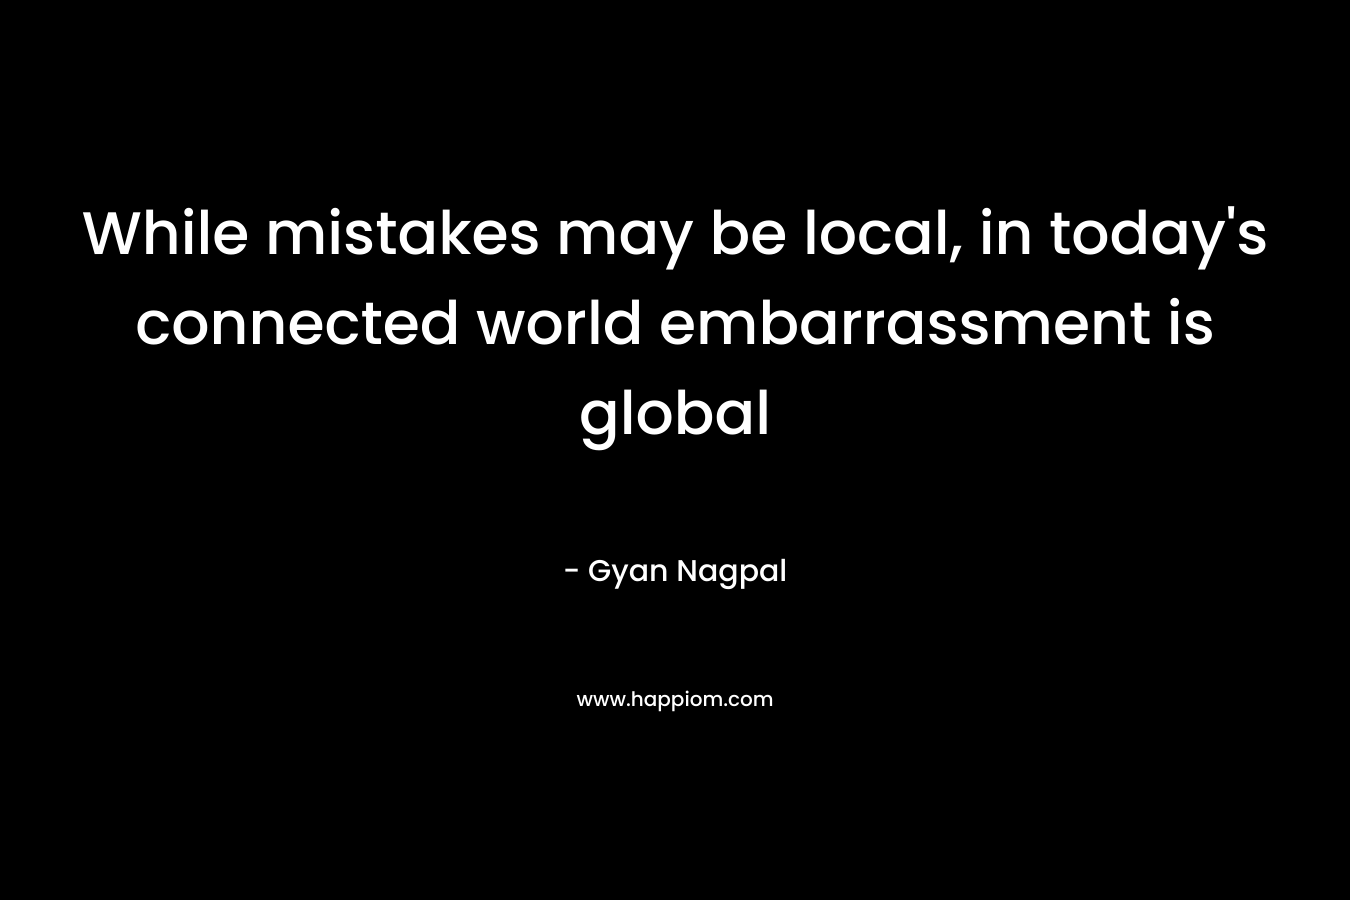 While mistakes may be local, in today’s connected world embarrassment is global – Gyan Nagpal